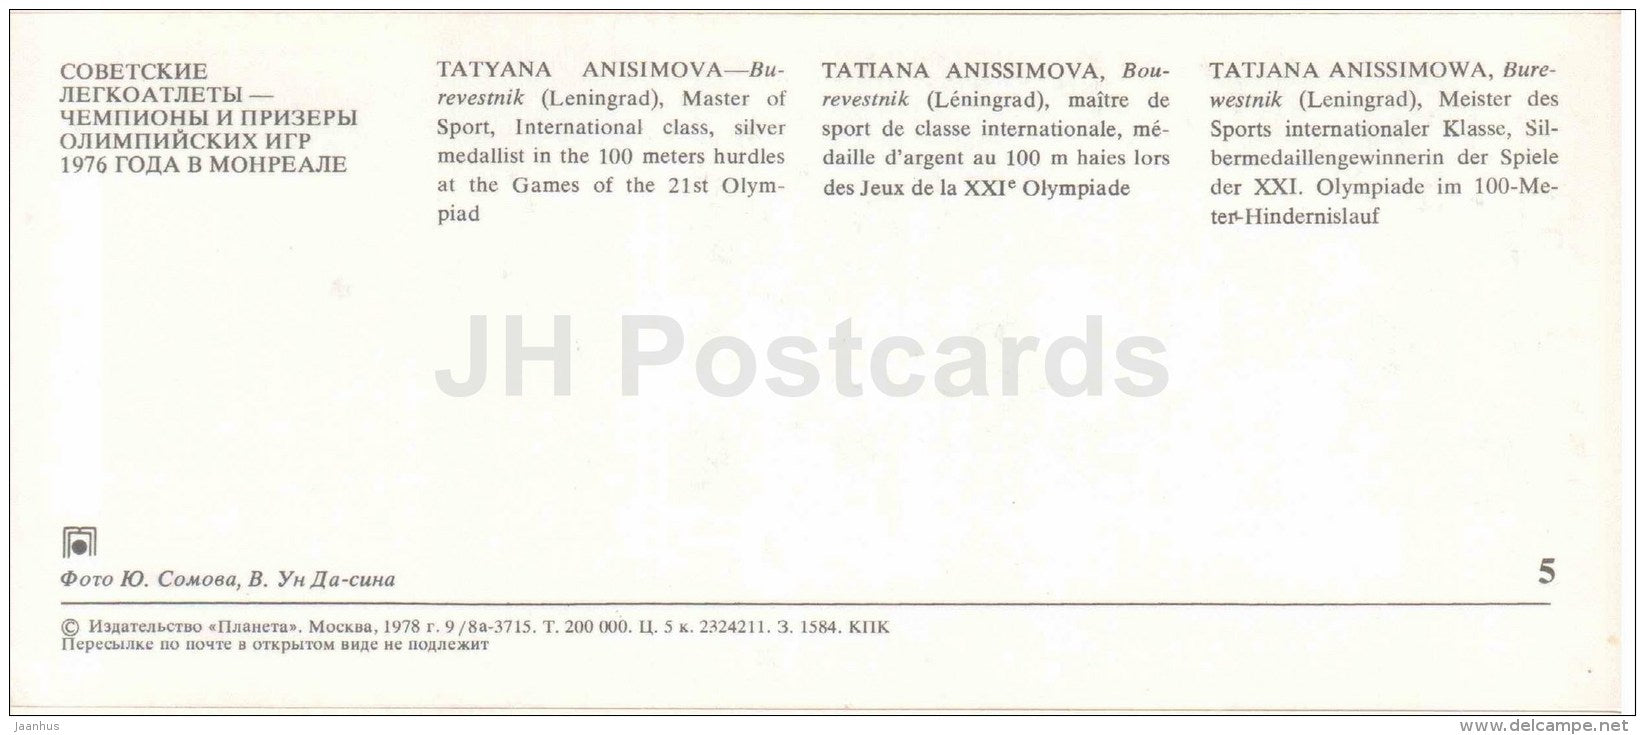 Tatyana Anisimova - 100m hurdles - Soviet medalists of the Olympic Games in Montreal - 1978 - Russia USSR - unused - JH Postcards